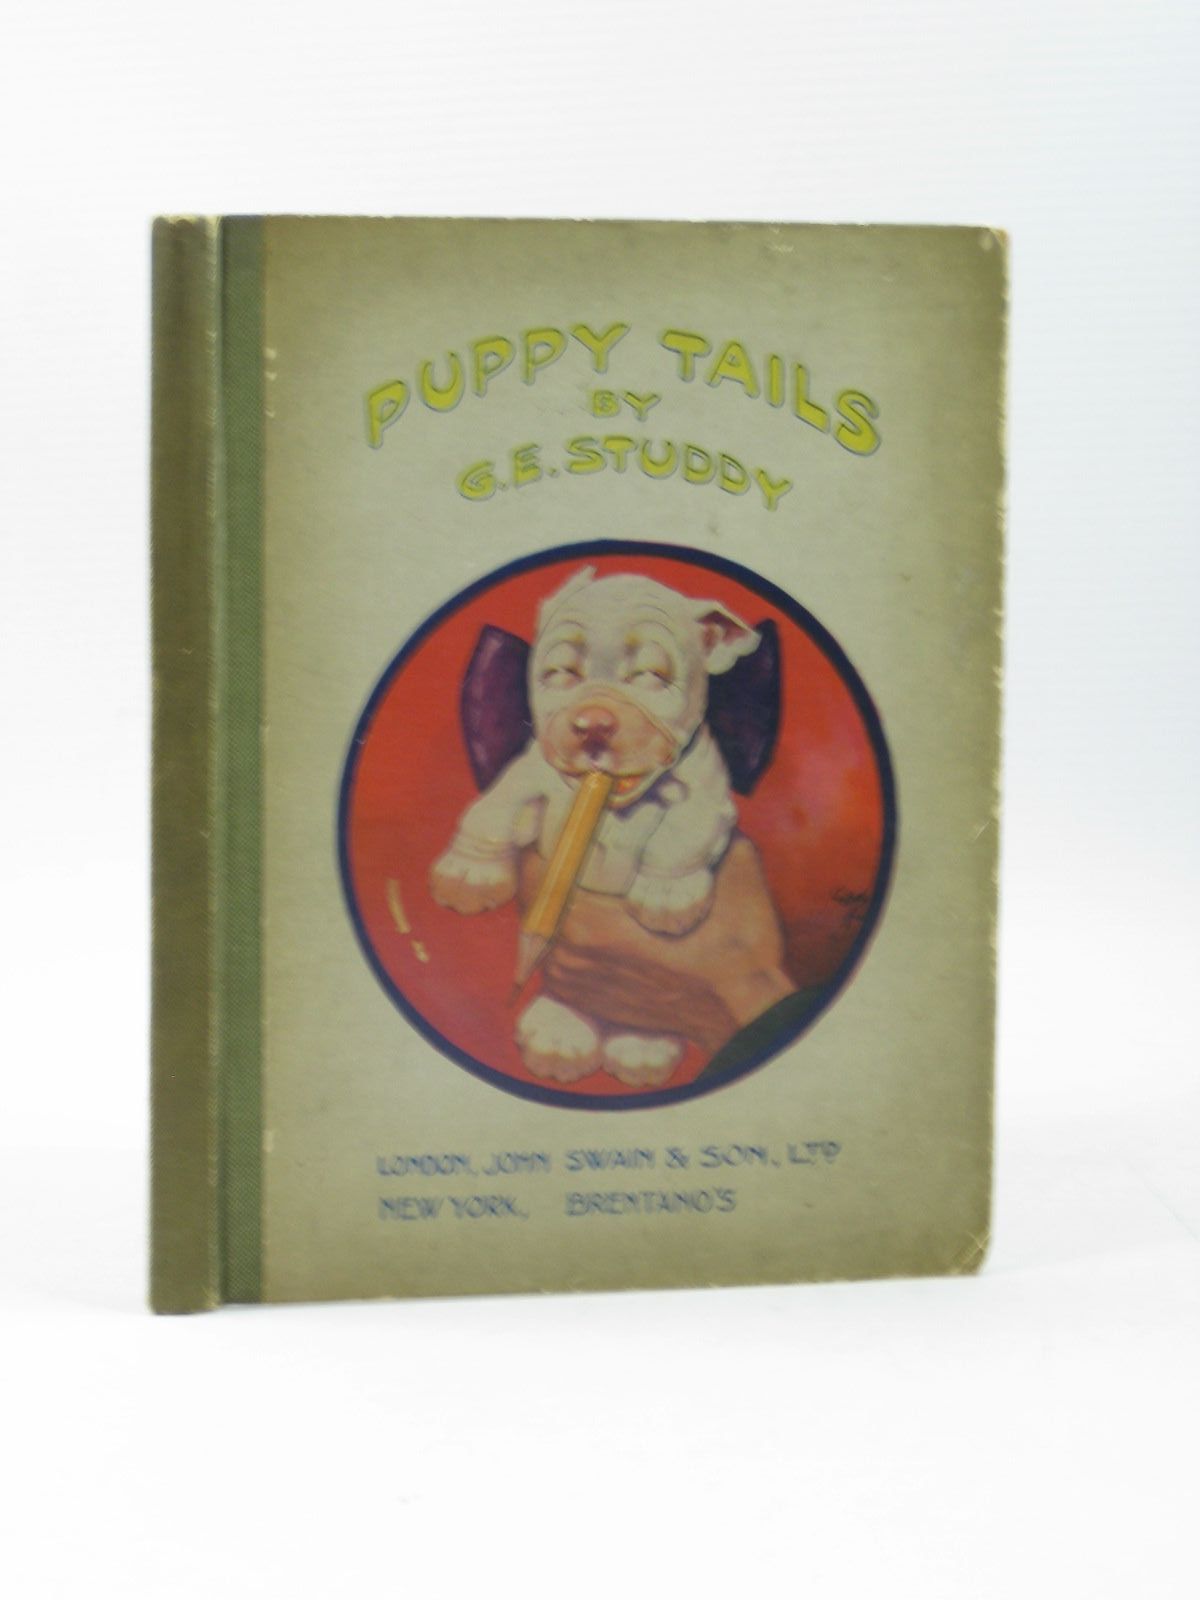 Photo of PUPPY TAILS written by Jellicoe, George illustrated by Studdy, G.E. published by John Swain &amp; Son Limited, Brentano's (STOCK CODE: 1313203)  for sale by Stella & Rose's Books